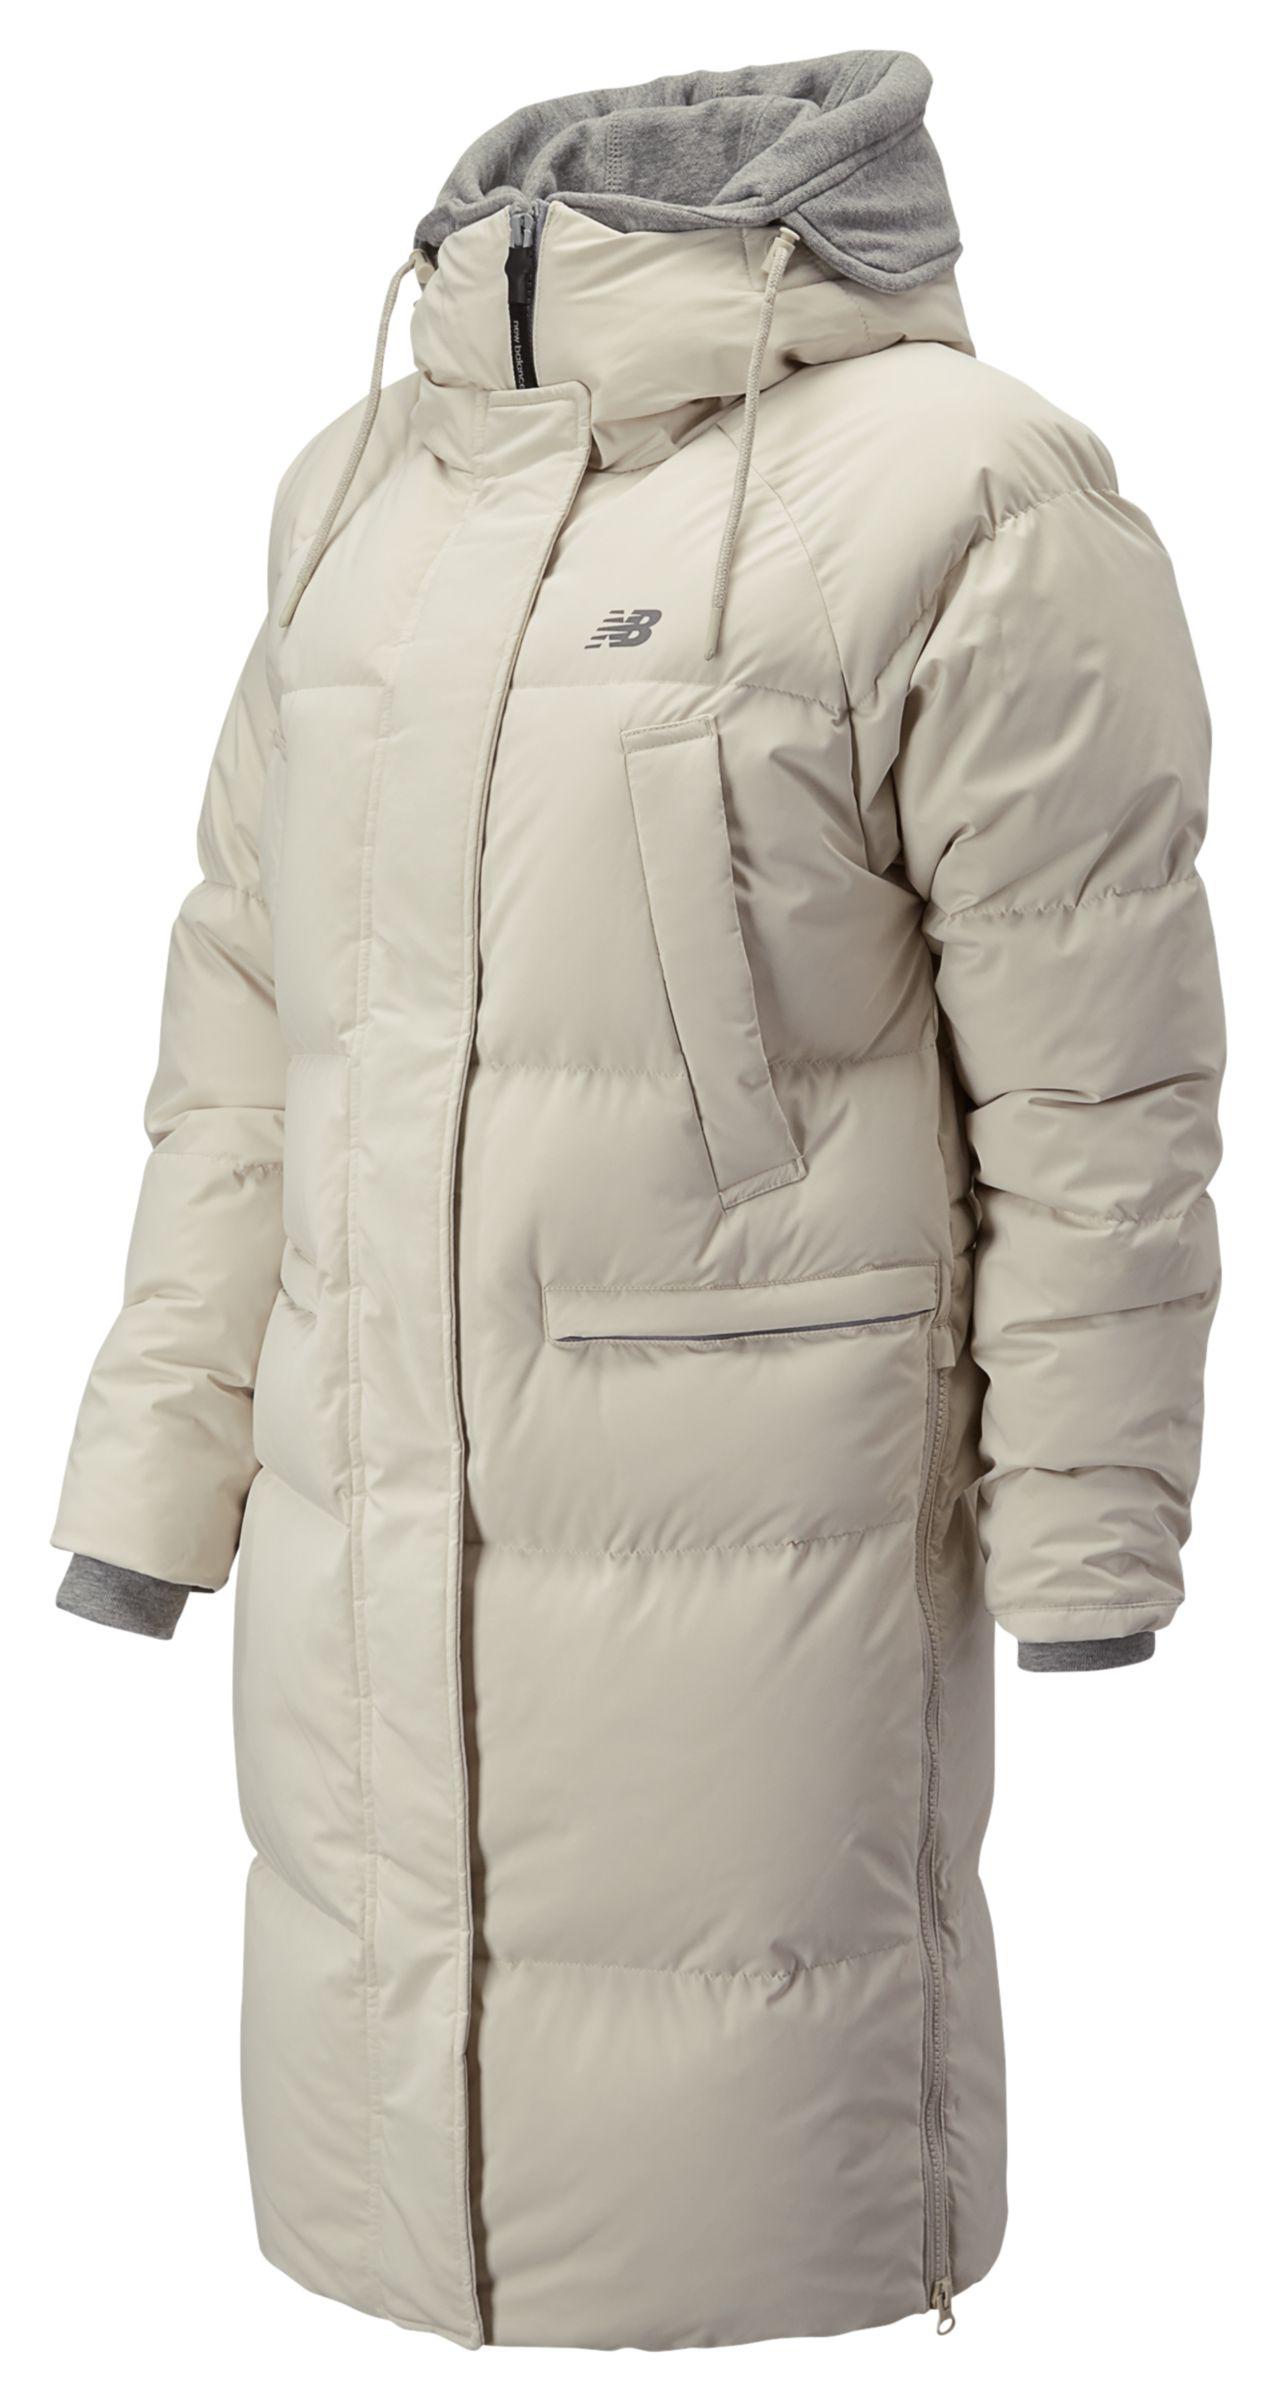 new balance 247 luxe snap down jacket